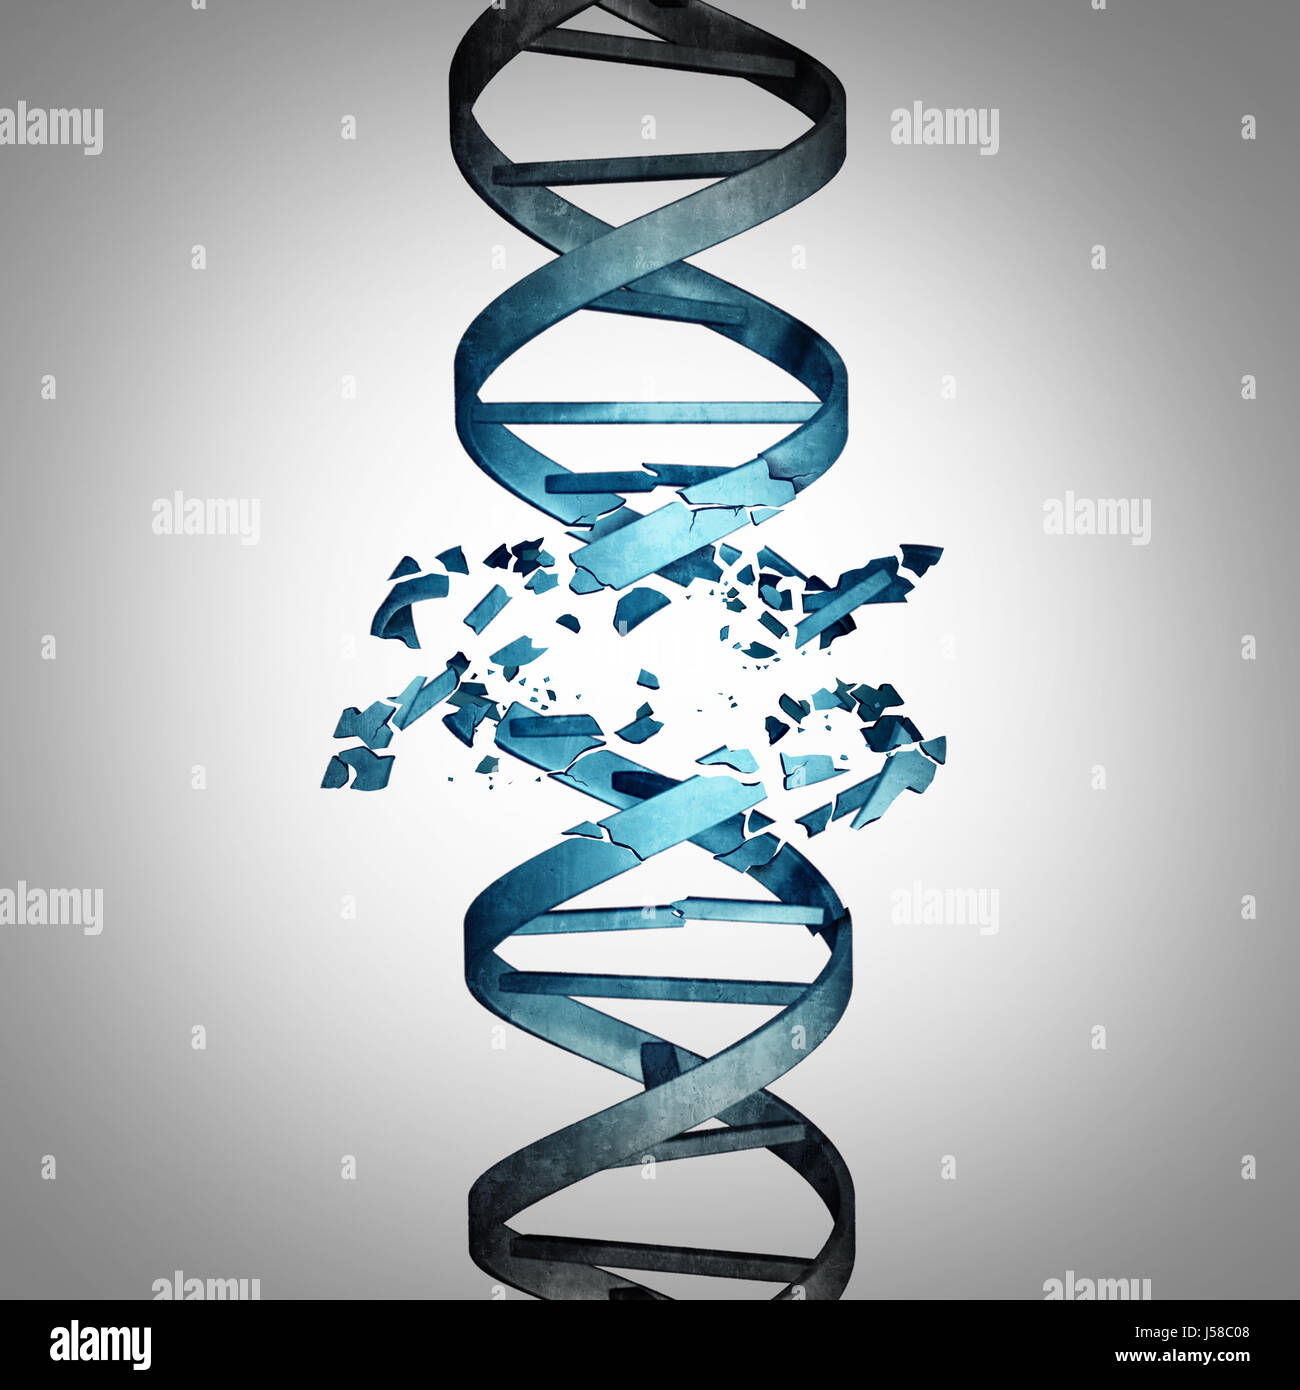 Damaged DNA and genetic mutation biotechnology concept as a double helix strand with damage as a medical symbol. Stock Photo